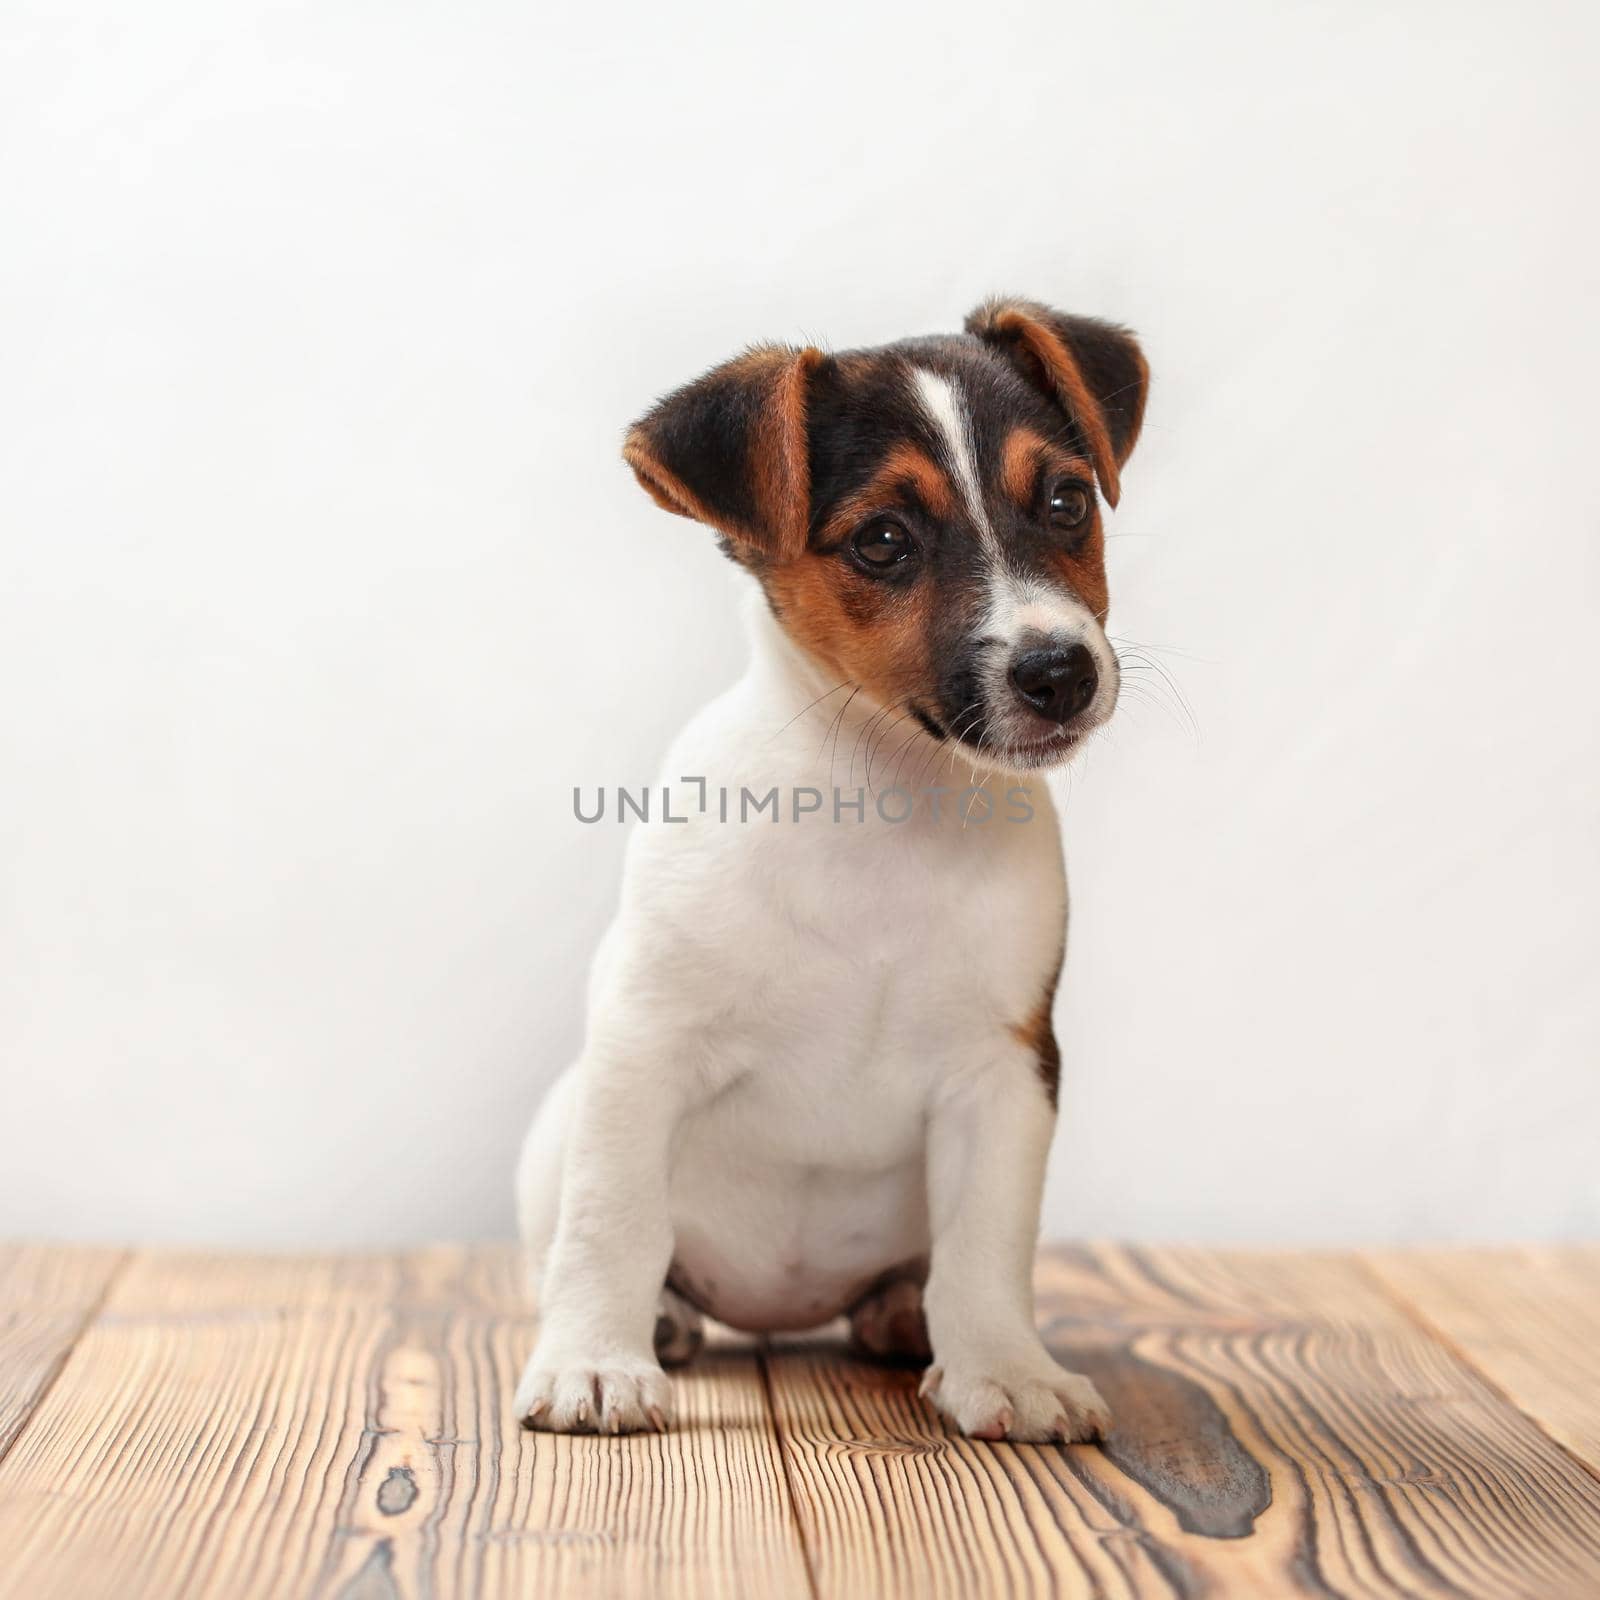 Two months old Jack Russell terrier puppy, studio shots on wooden boards with white background. by Ivanko